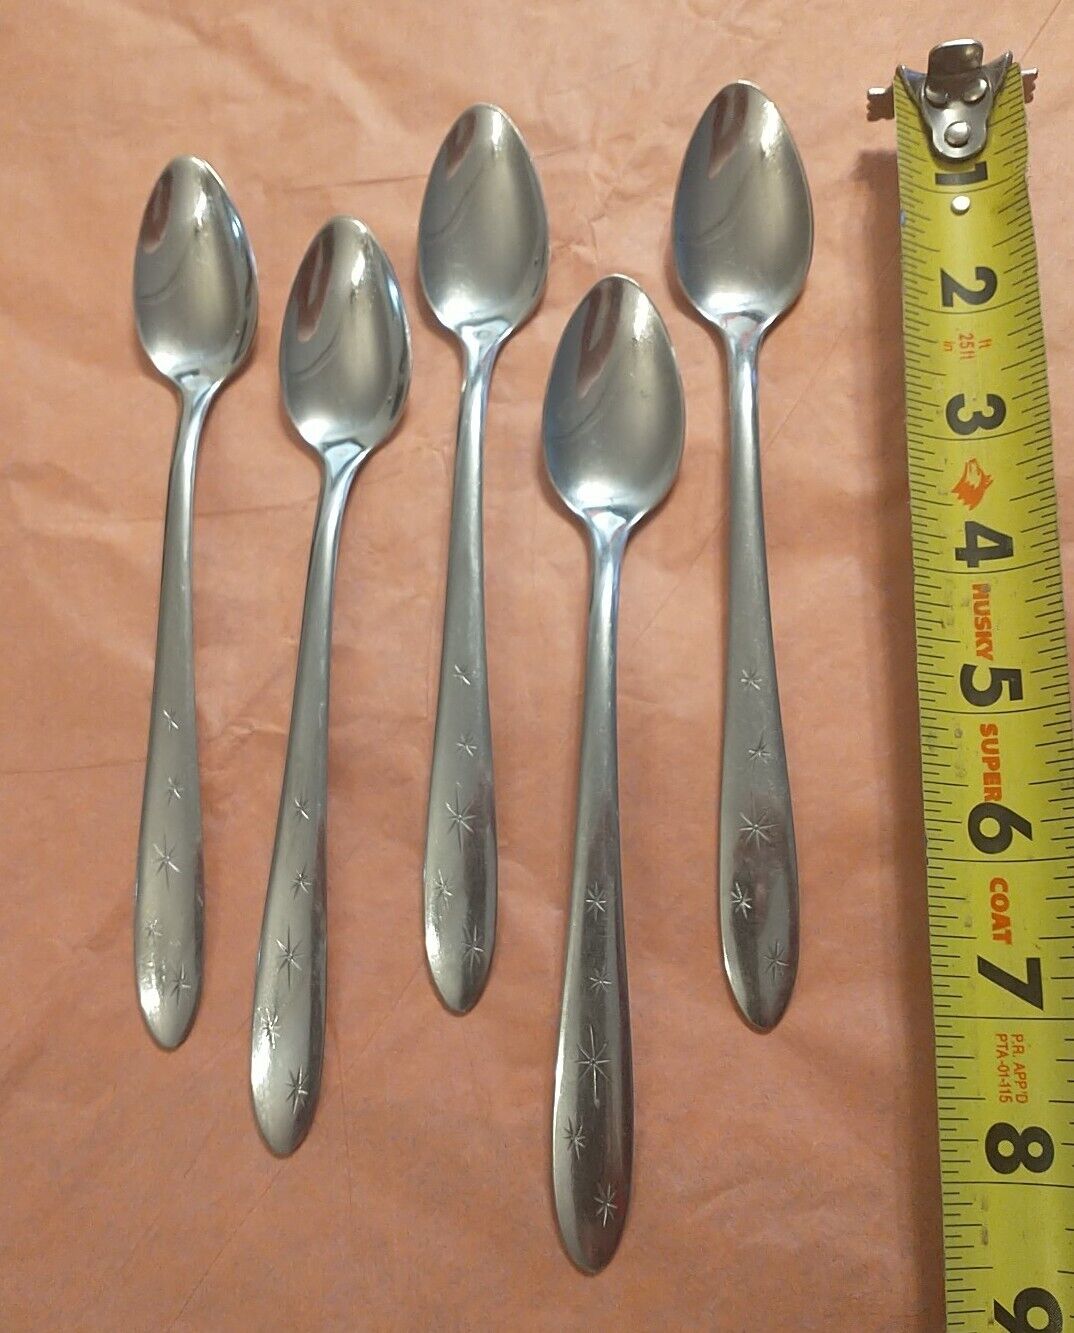 Mar Crest Starburst Stainless Flatware USA Made Set of 5 ICED TEA SPOONS Atomic 